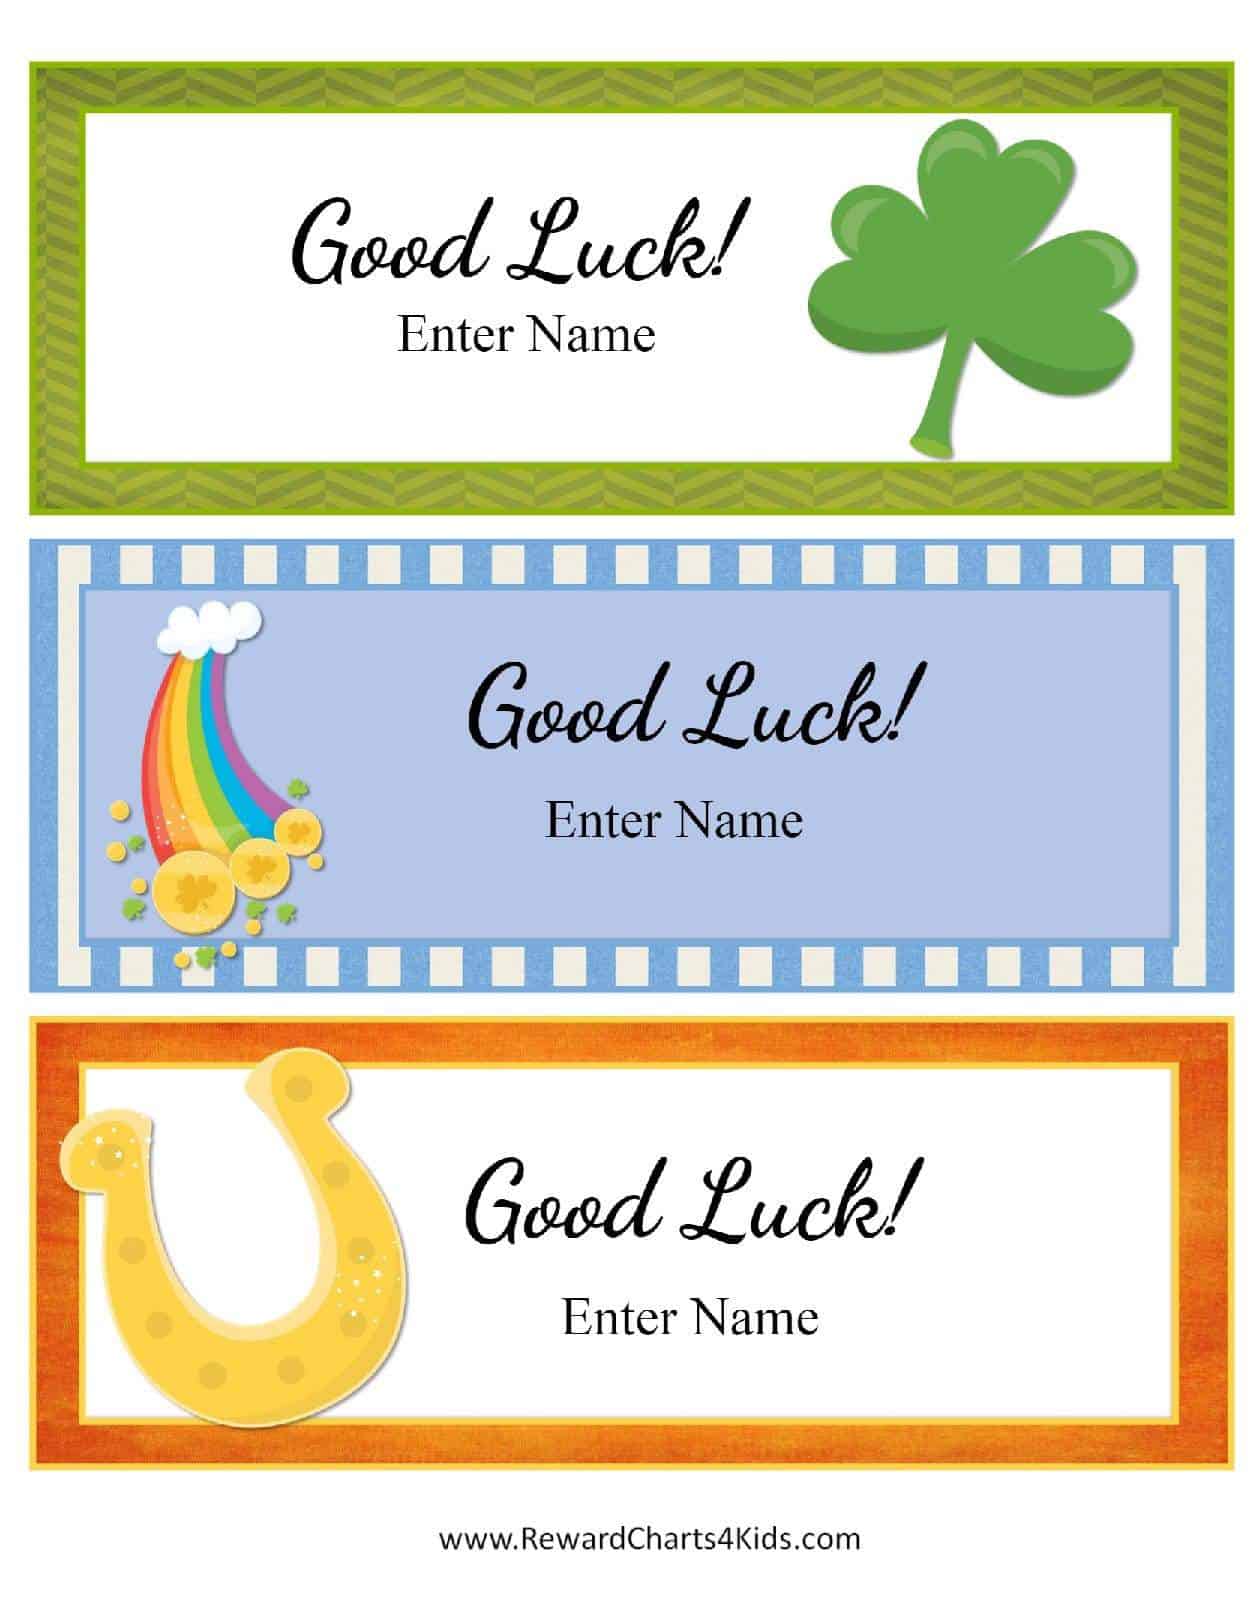 Free Good Luck Cards For Kids Customize Online Print At Home